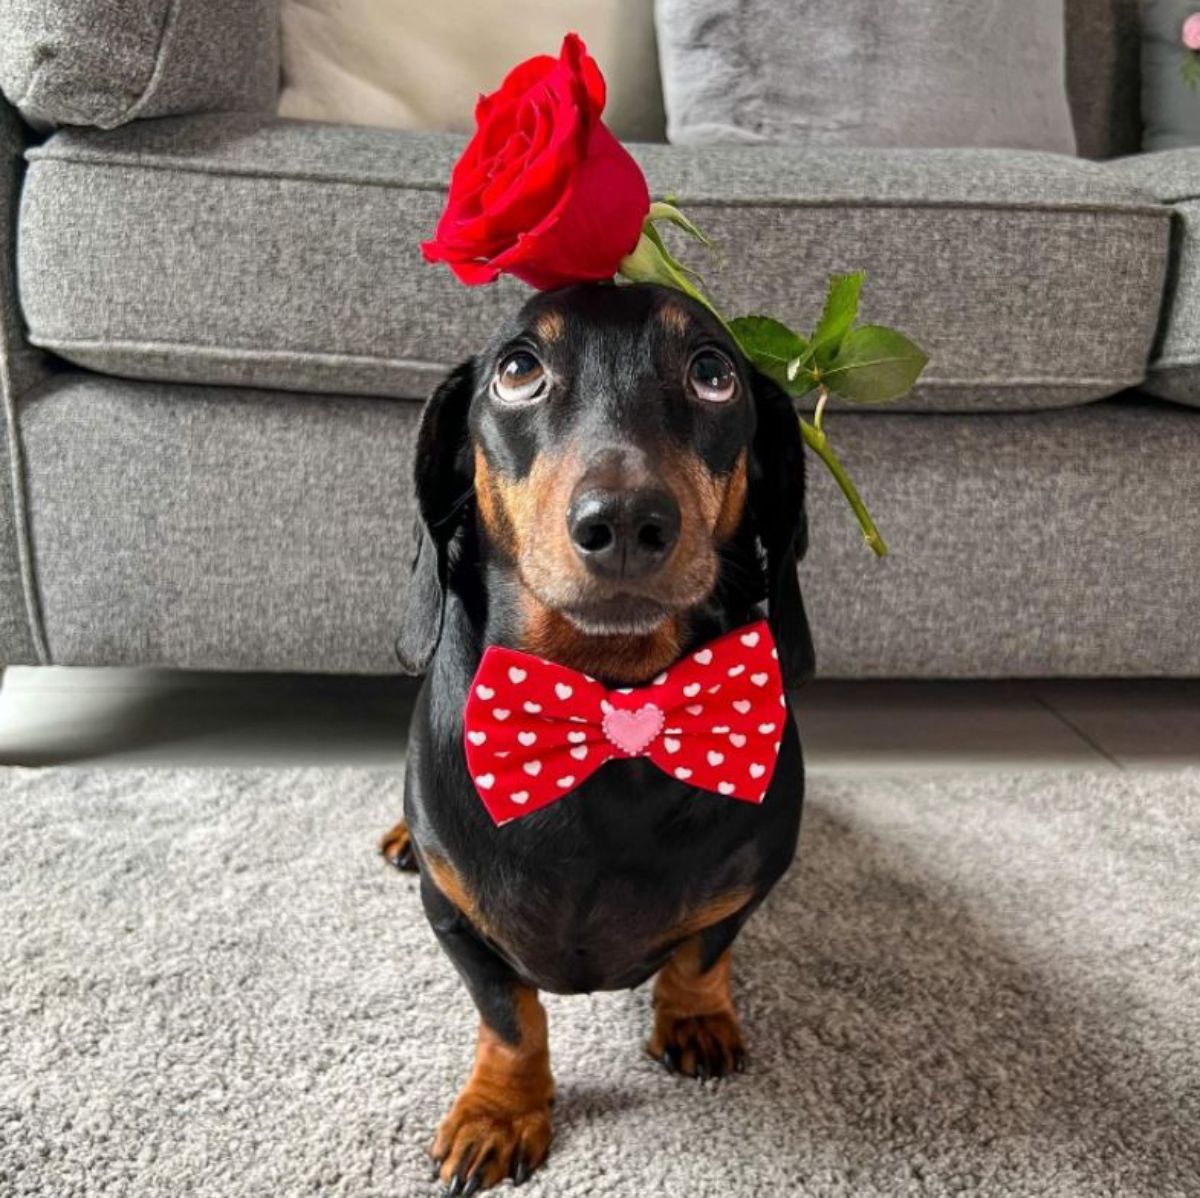 black and brown dachshund standing with a red rose on the head and the dog is wearing a red and white heart patterned bowtie